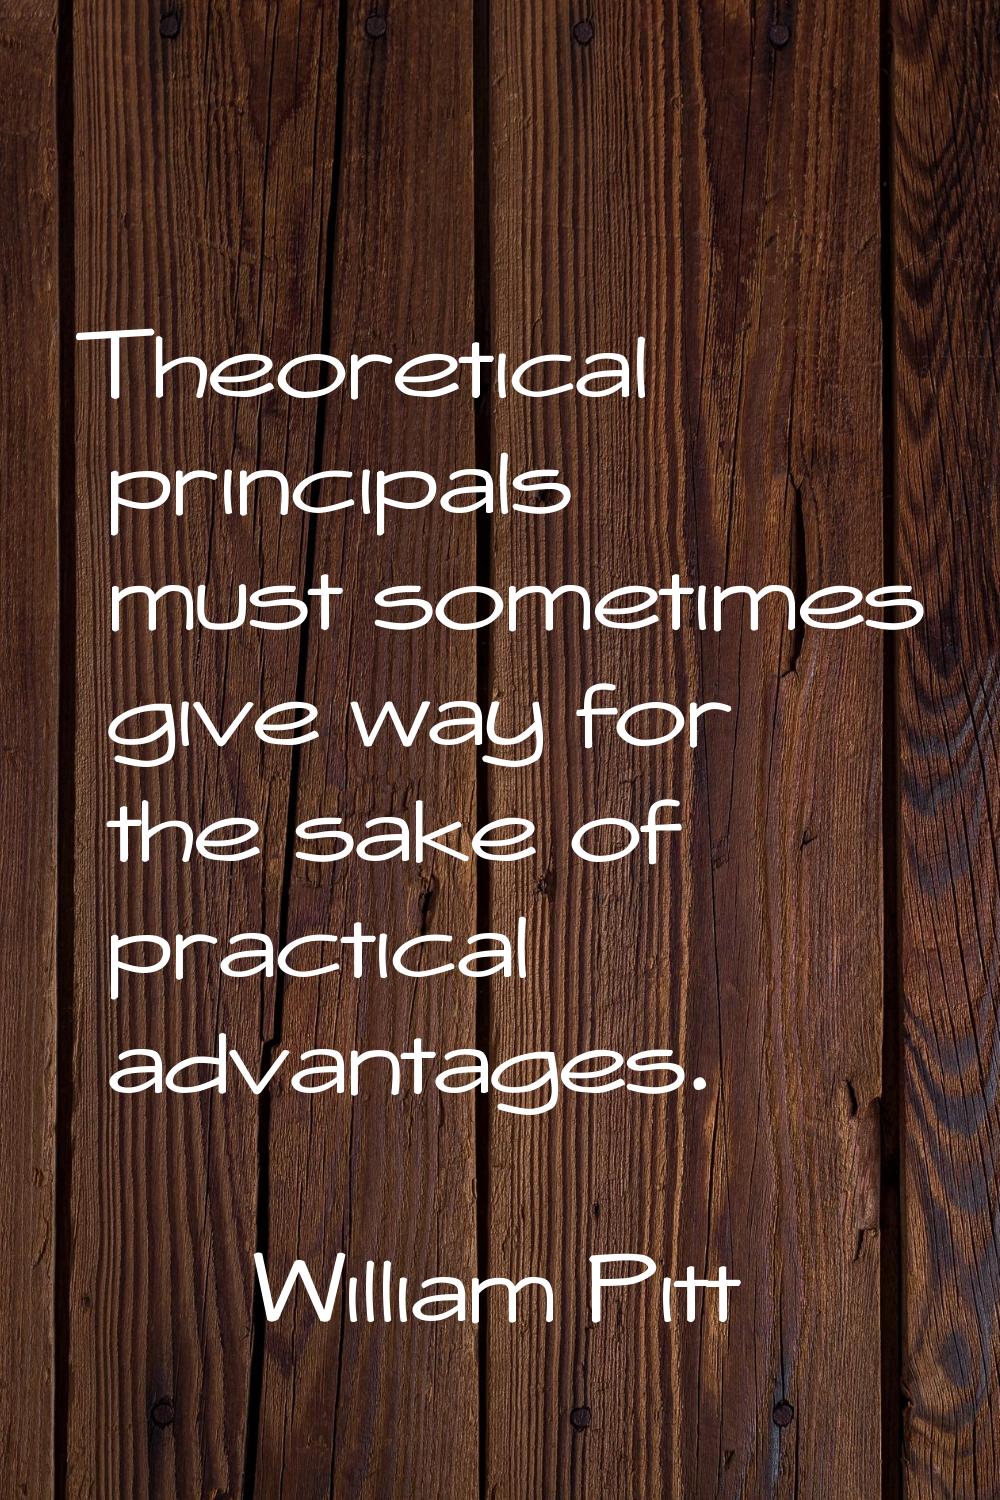 Theoretical principals must sometimes give way for the sake of practical advantages.